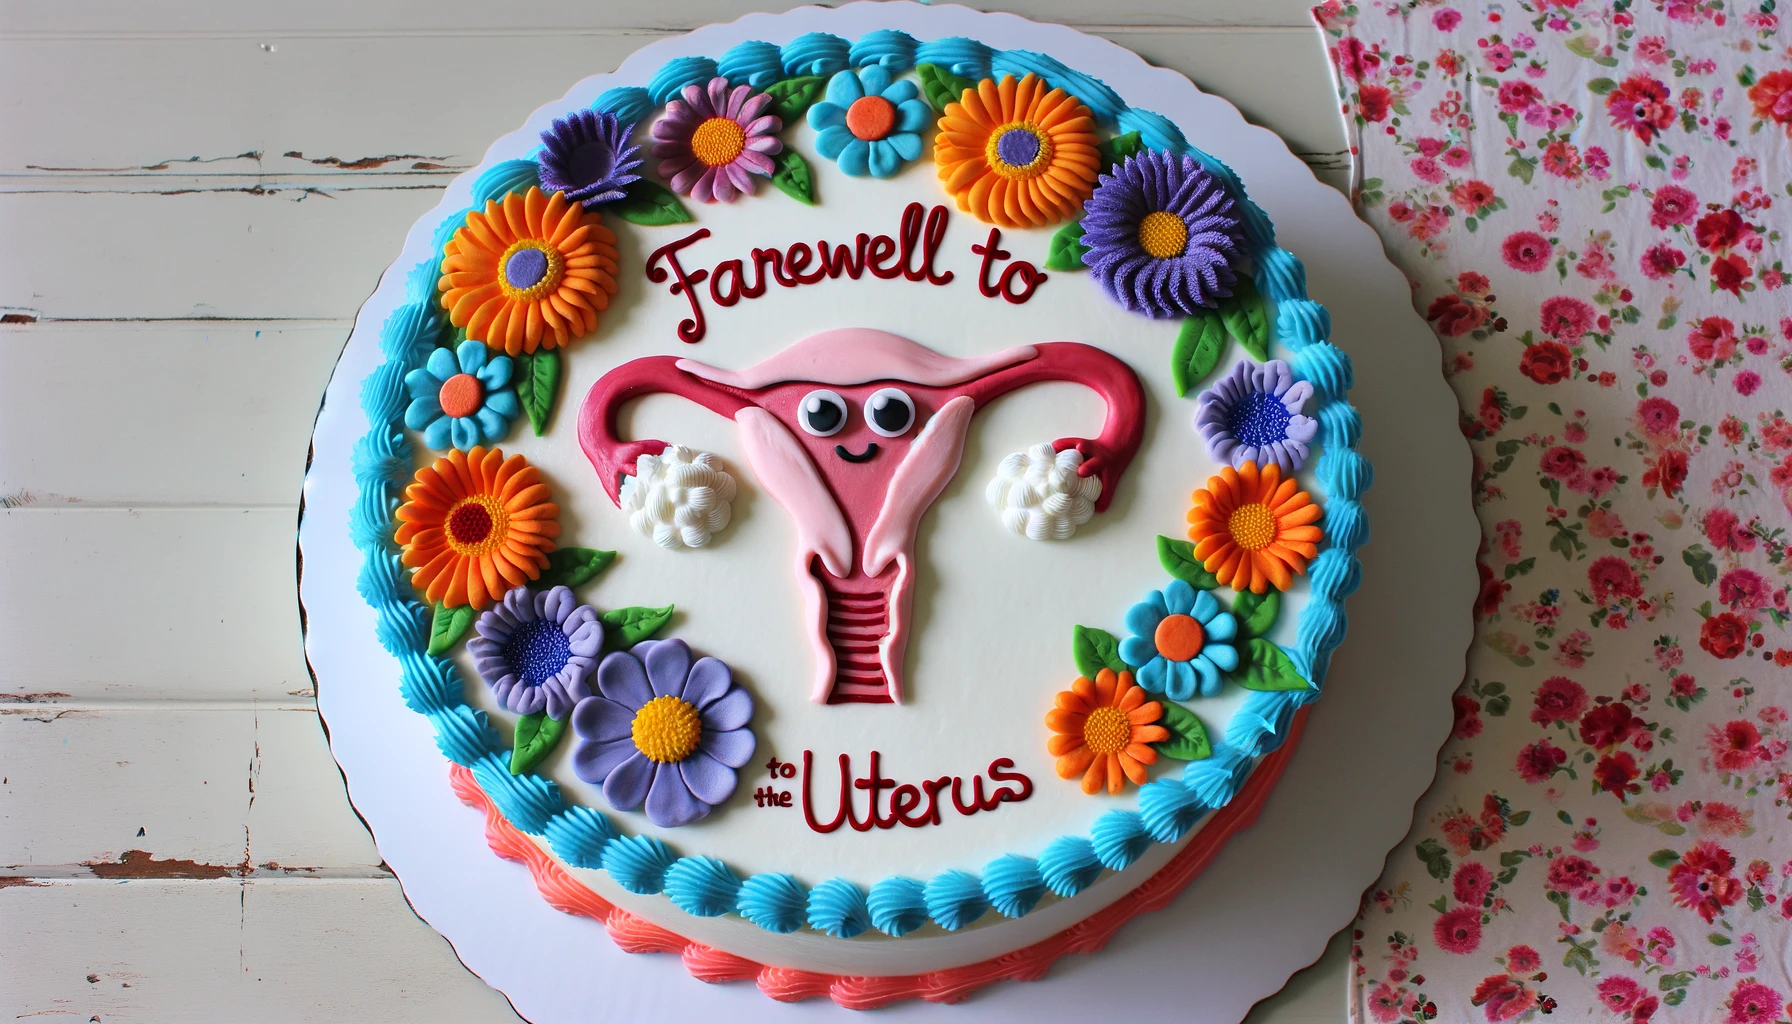 A celebratory cake with a whimsical design featuring a cartoon uterus, and googly eyes, surrounded by colorful fondant flowers.